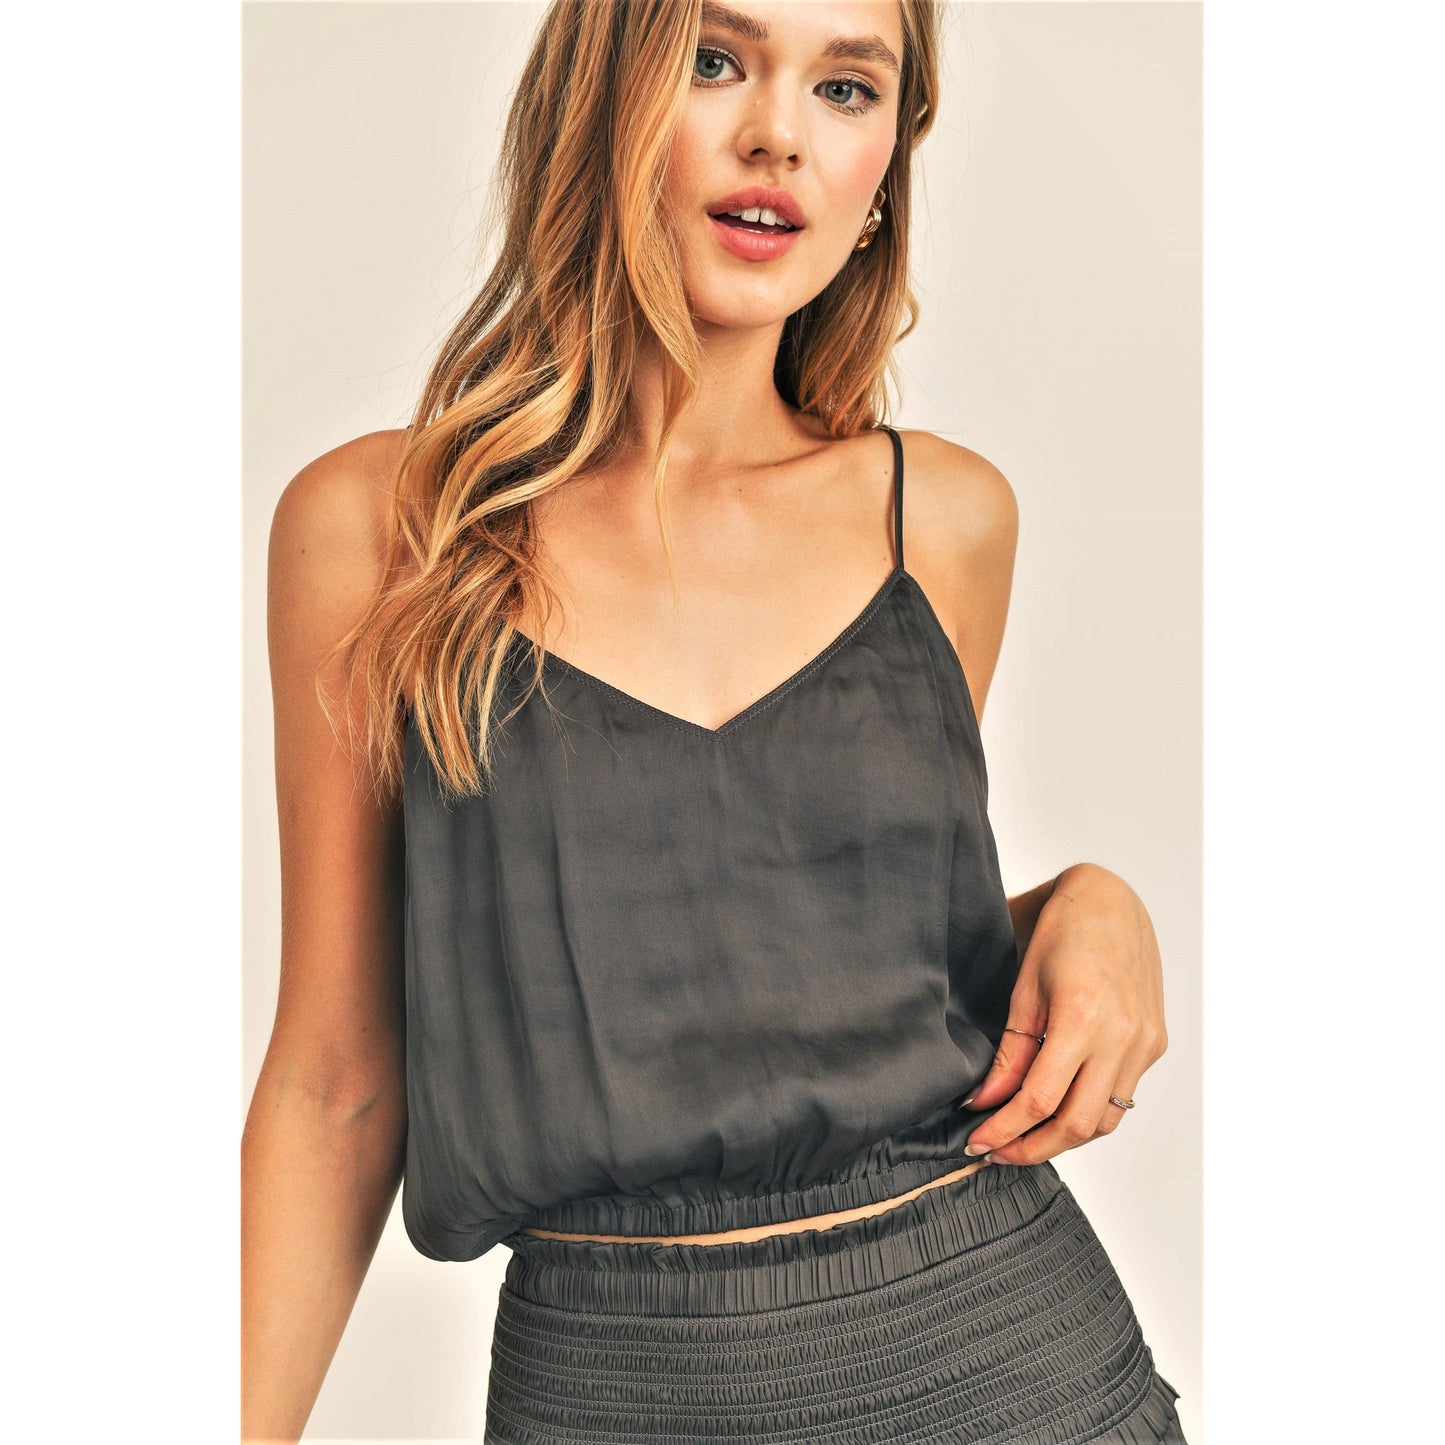 Silky Amore Top - Black